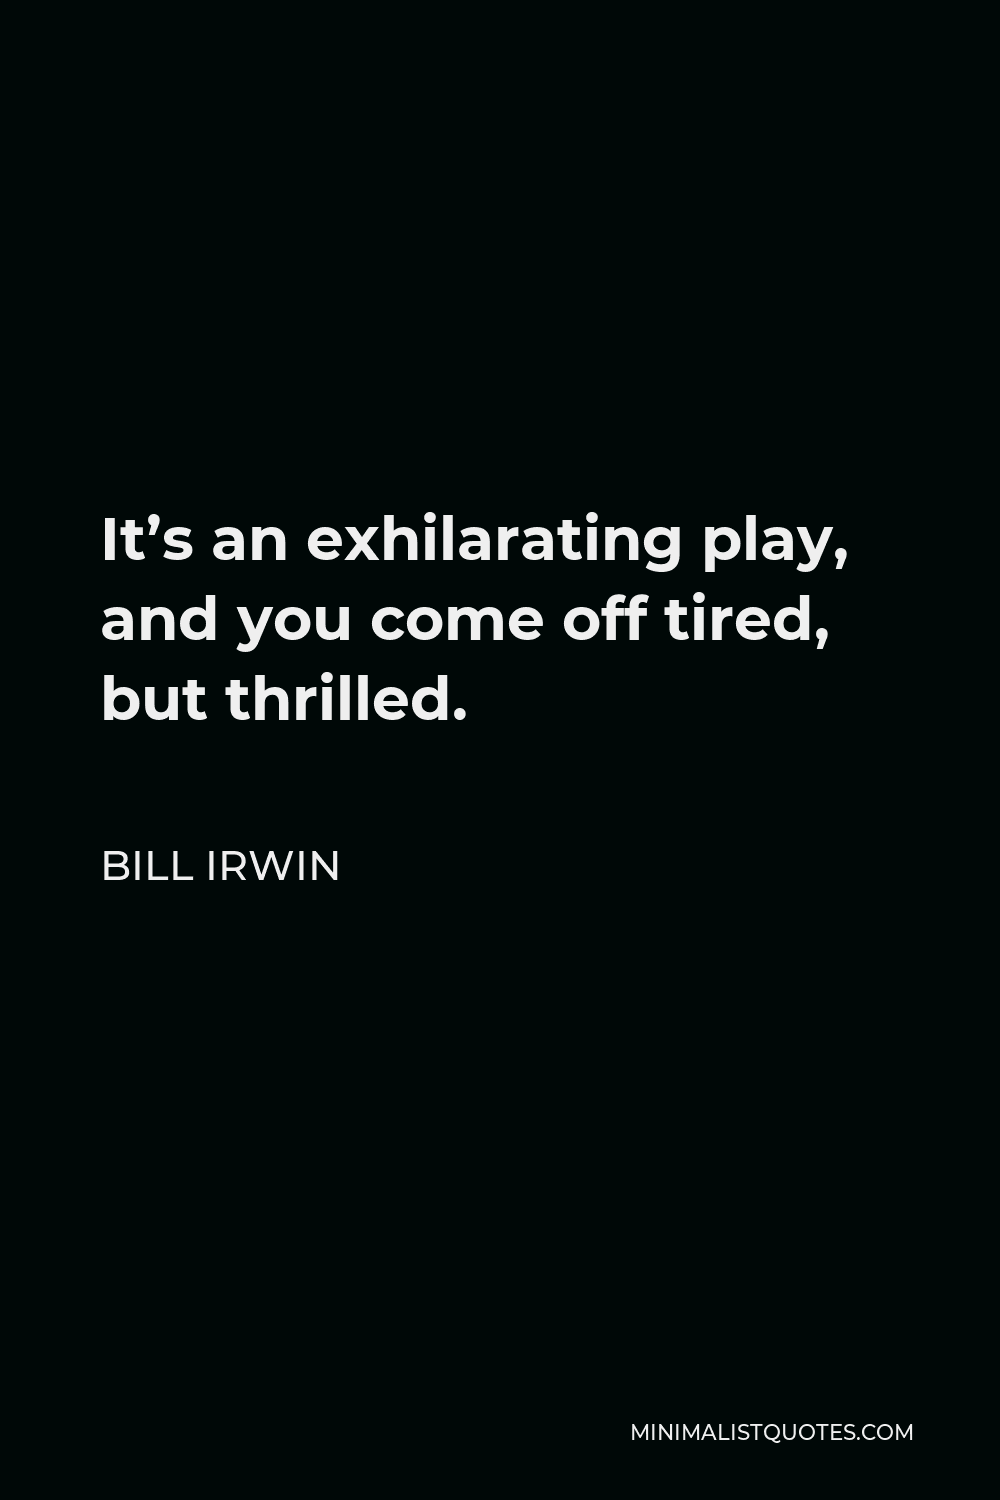 Bill Irwin Quote - It’s an exhilarating play, and you come off tired, but thrilled.